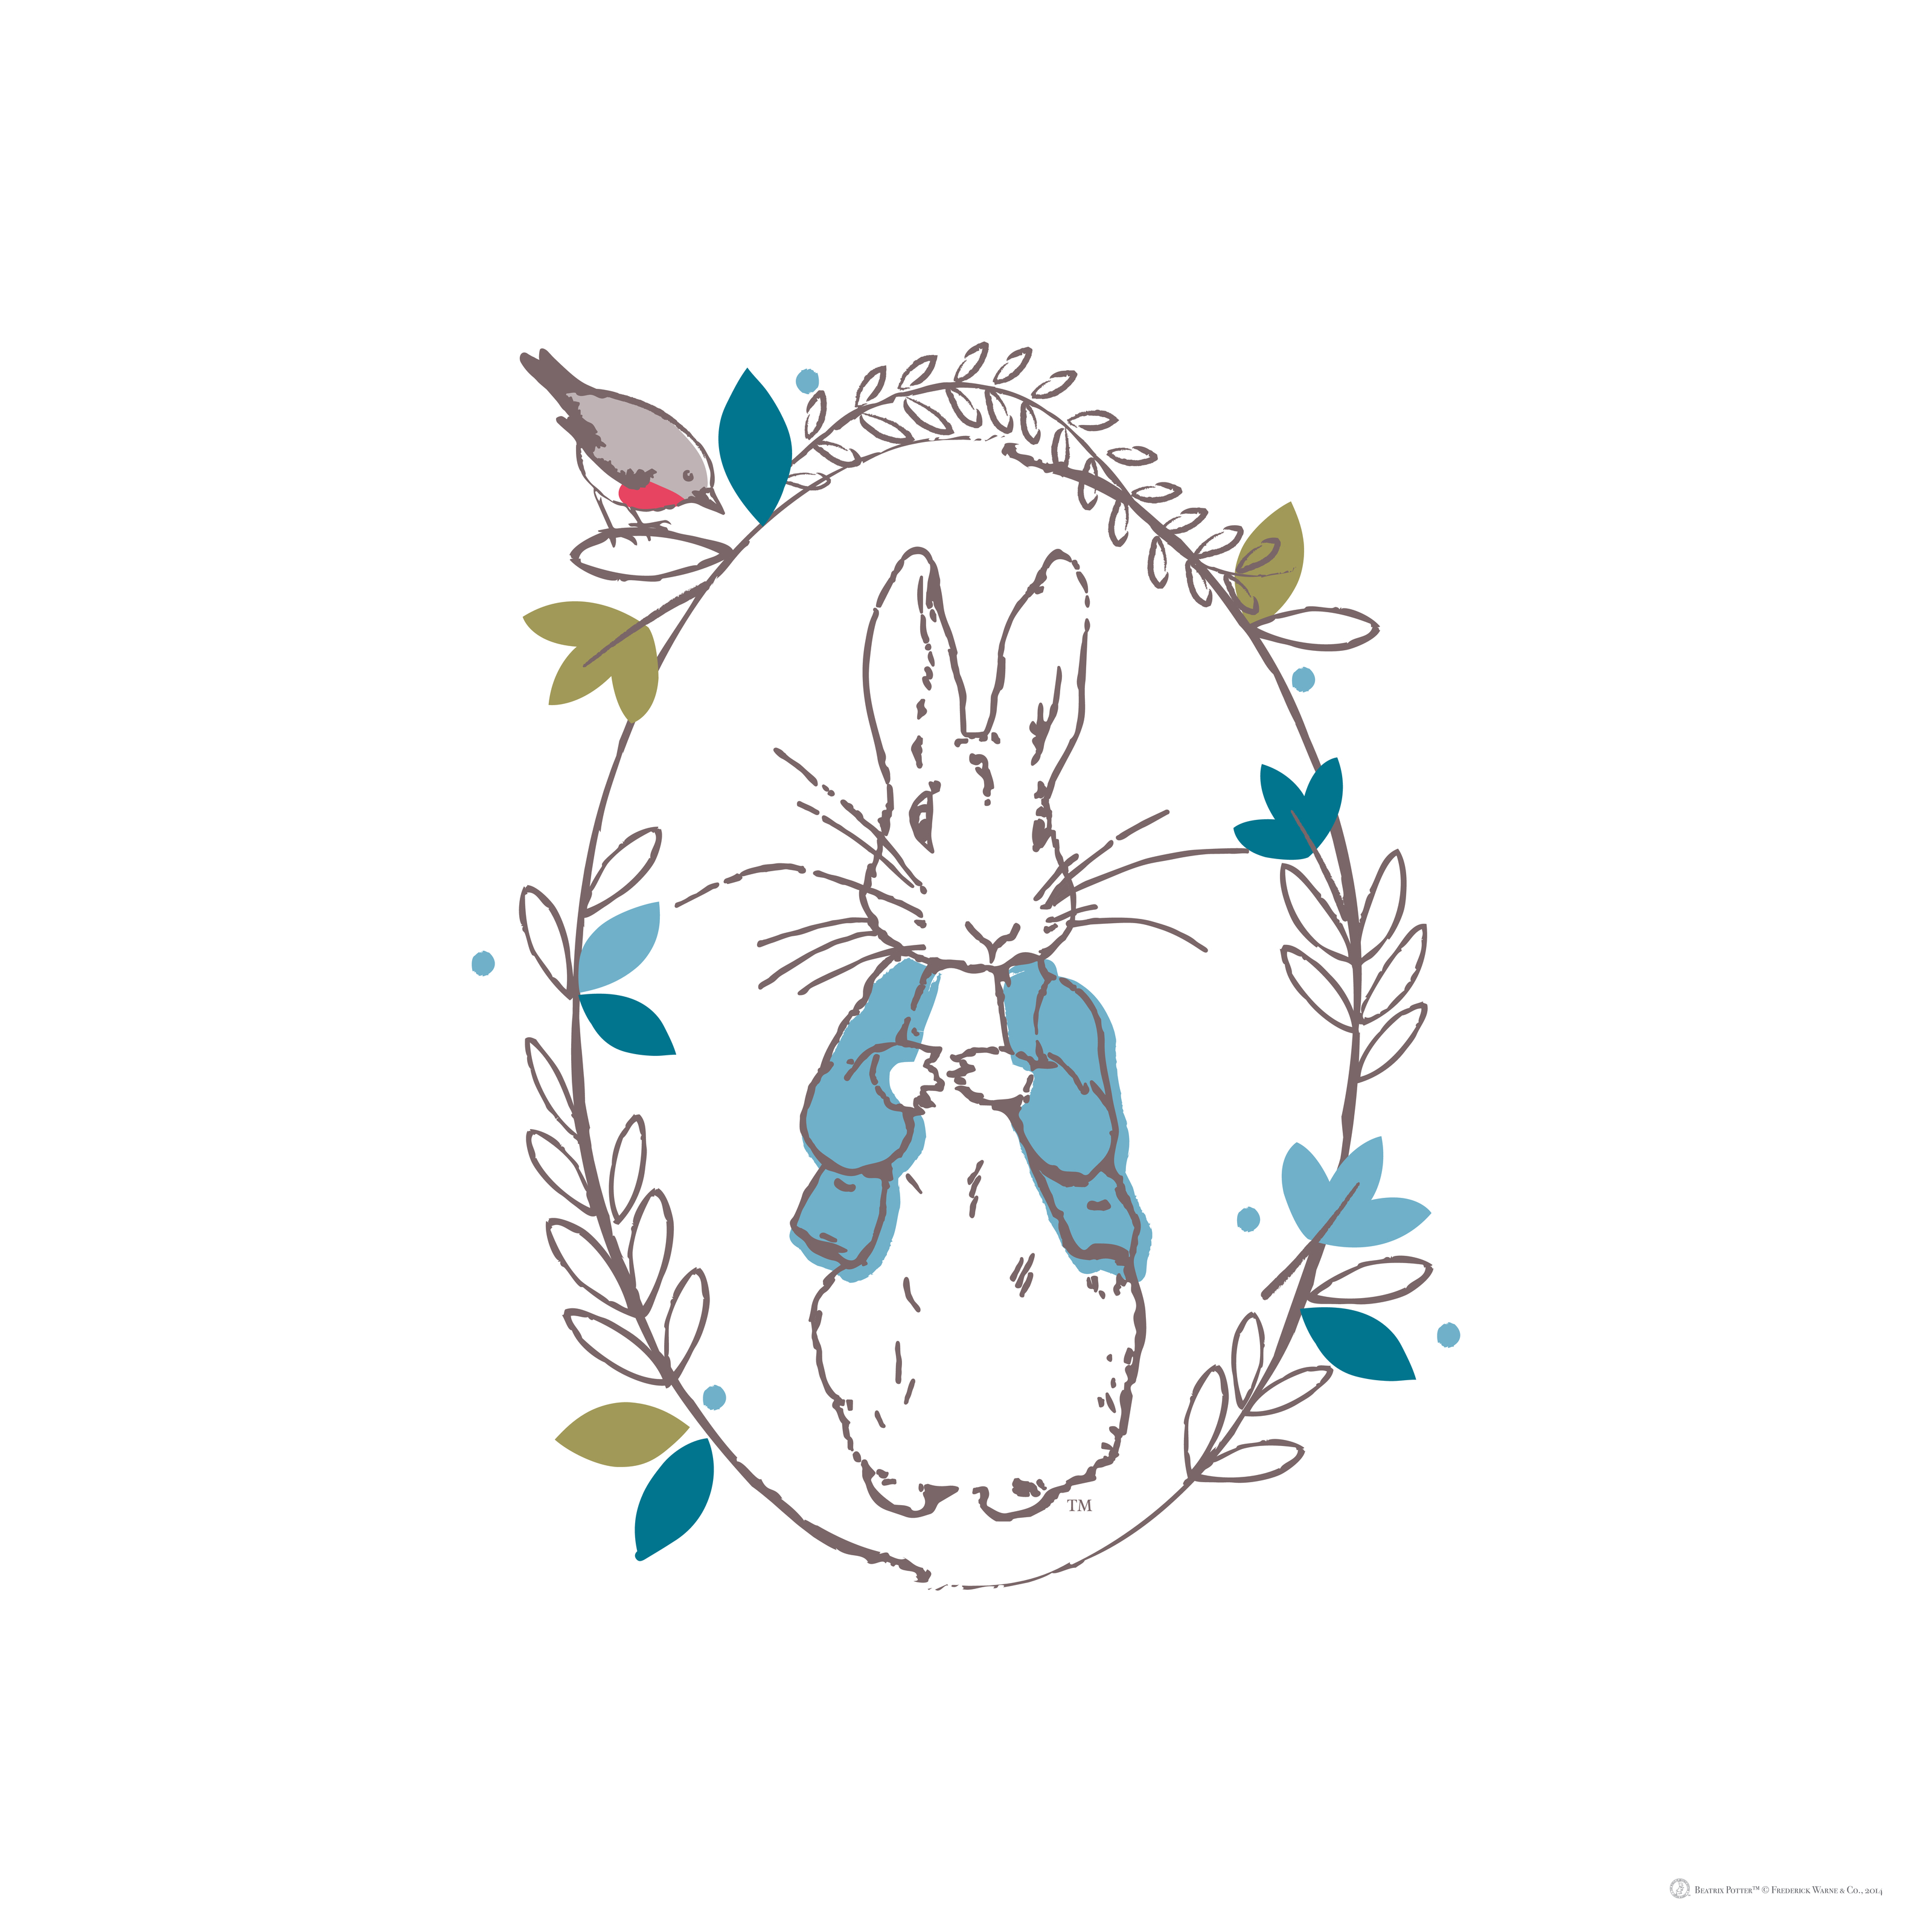 Hand Made Peter Rabbit Mural Inspired By Beatrix Potter By Visionary Mural  Co. by Visionary Mural Co.